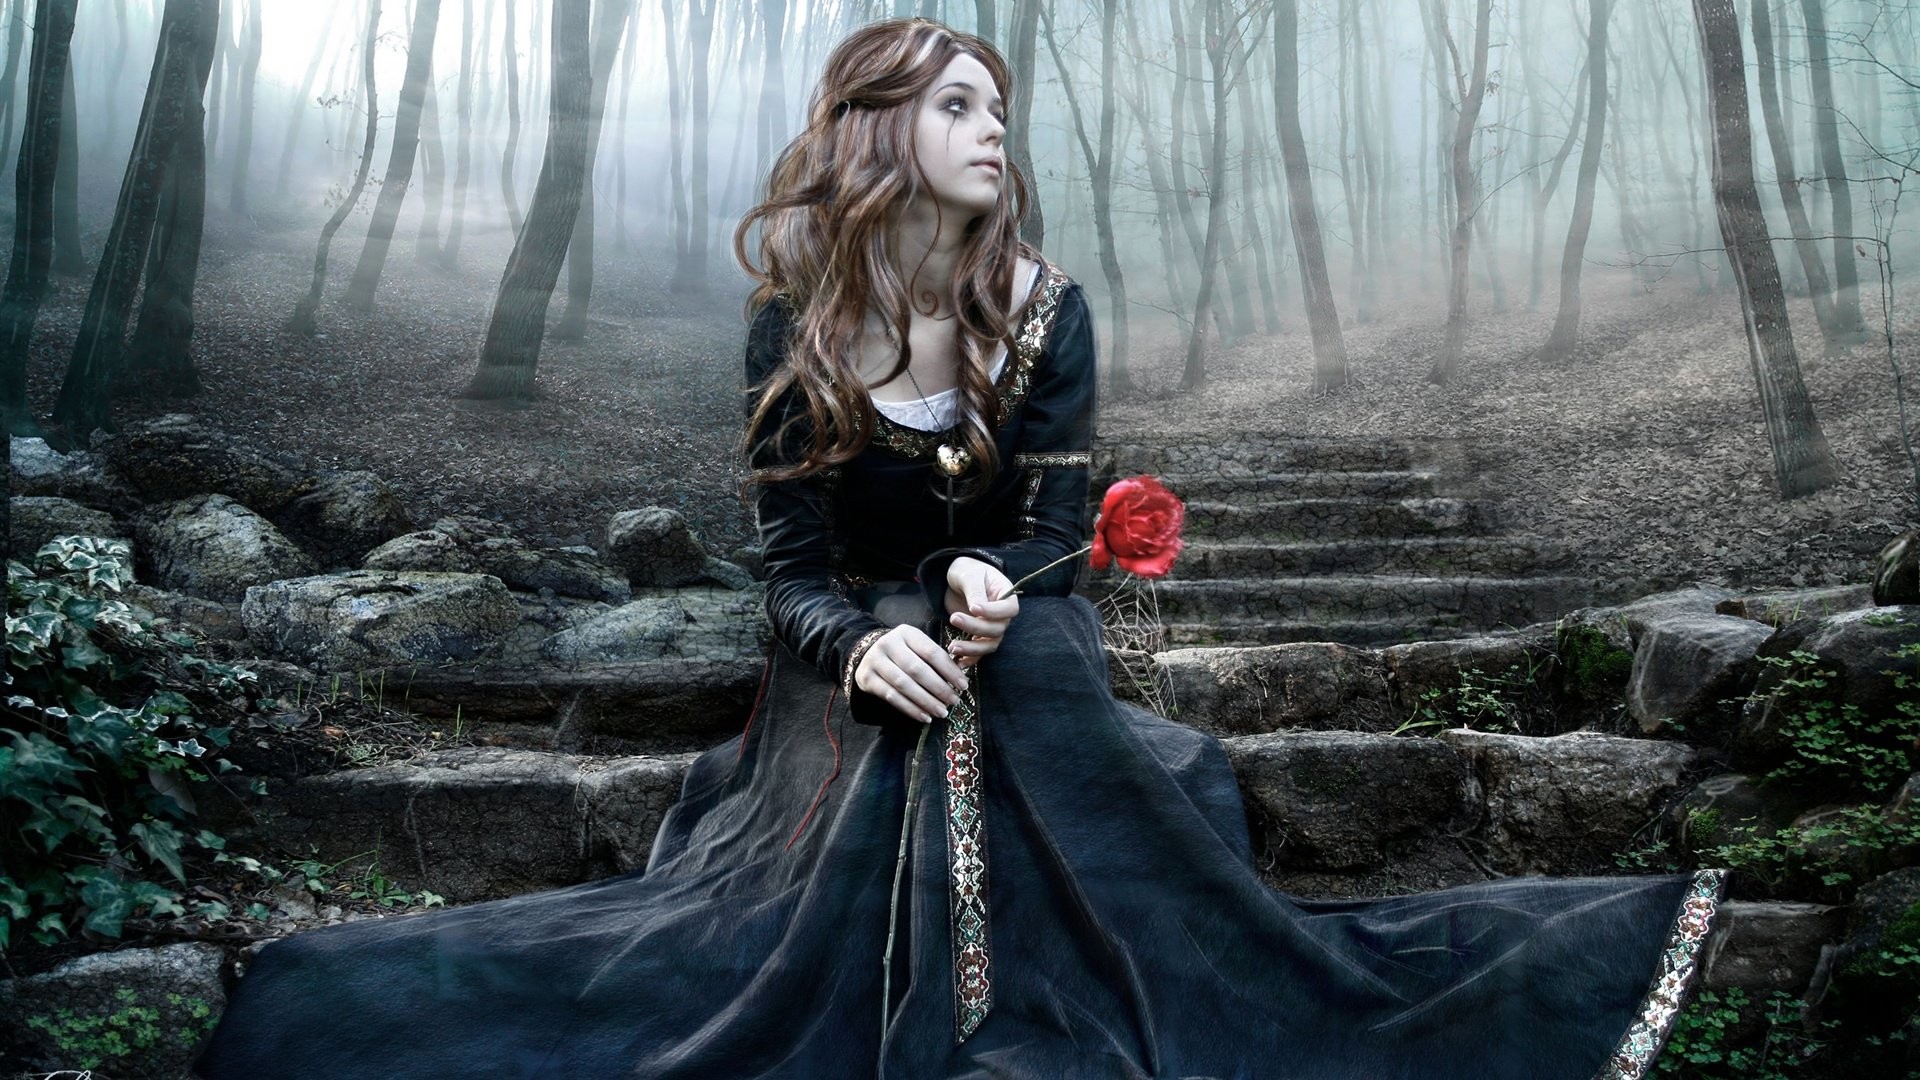 Sad Gothic Pictures Wallpapers